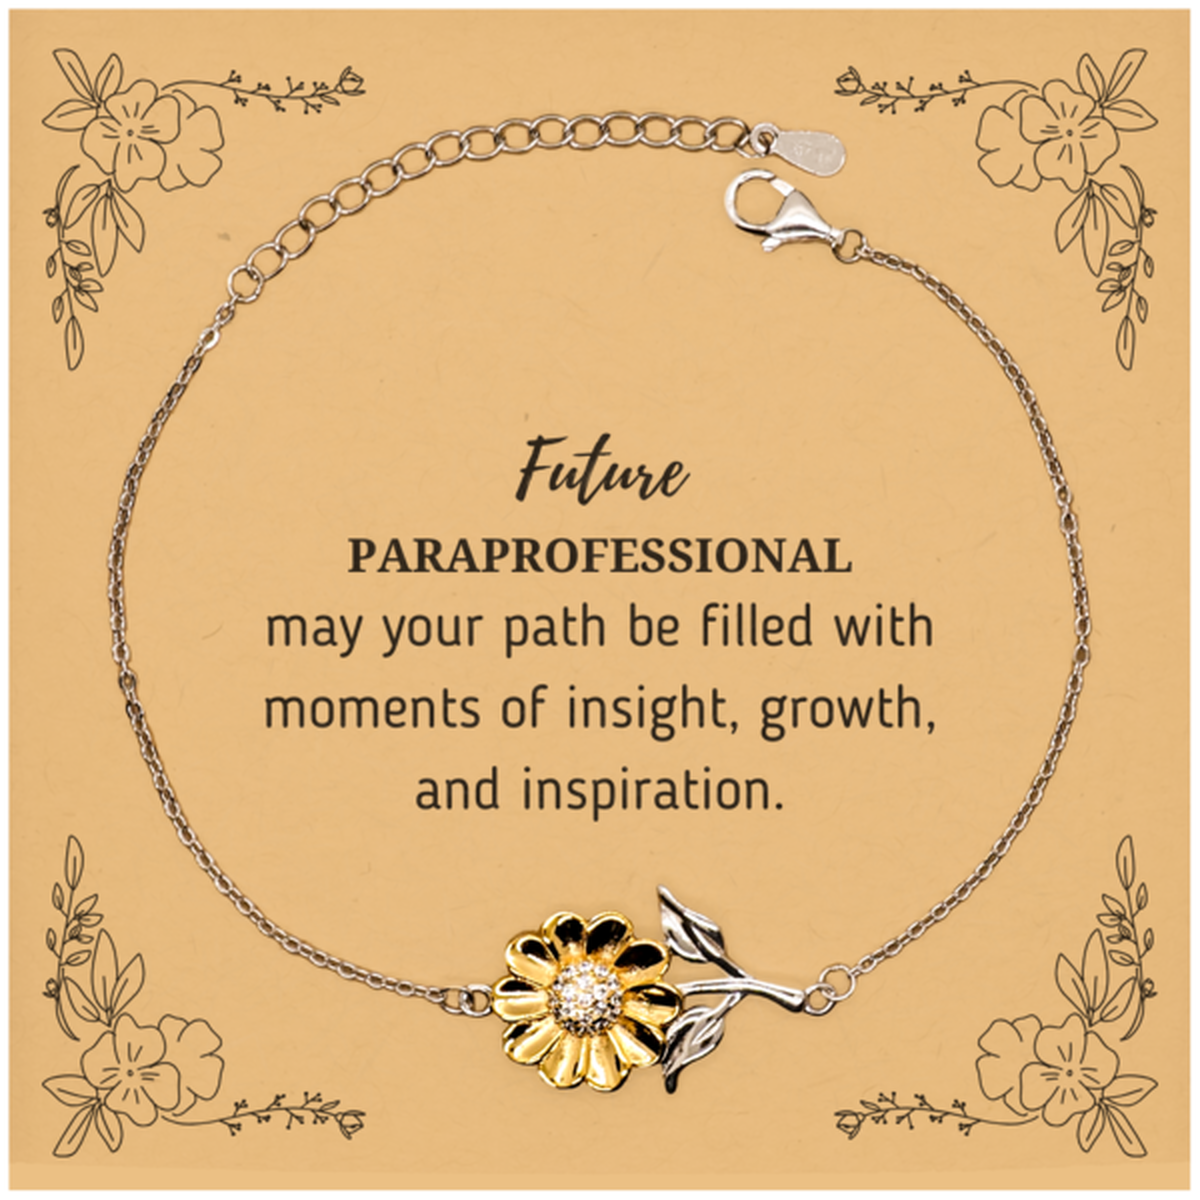 Future Paraprofessional Gifts, May your path be filled with moments of insight, Graduation Gifts for New Paraprofessional, Christmas Unique Sunflower Bracelet For Men, Women, Friends